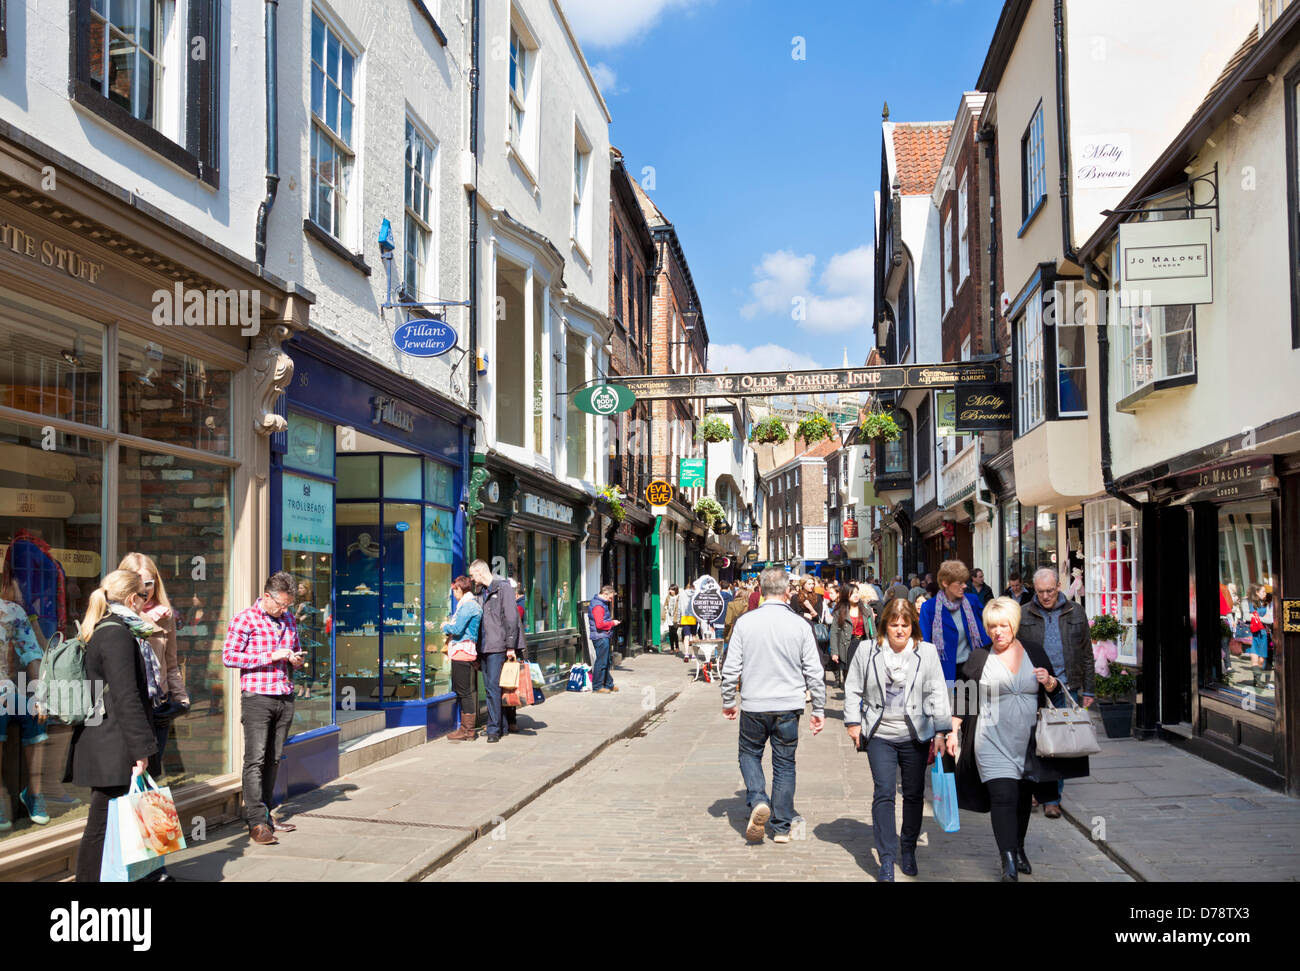 Stonegate in the city of York is a busy shopping street, York city centre North Yorkshire England UK GB Europe Stock Photo